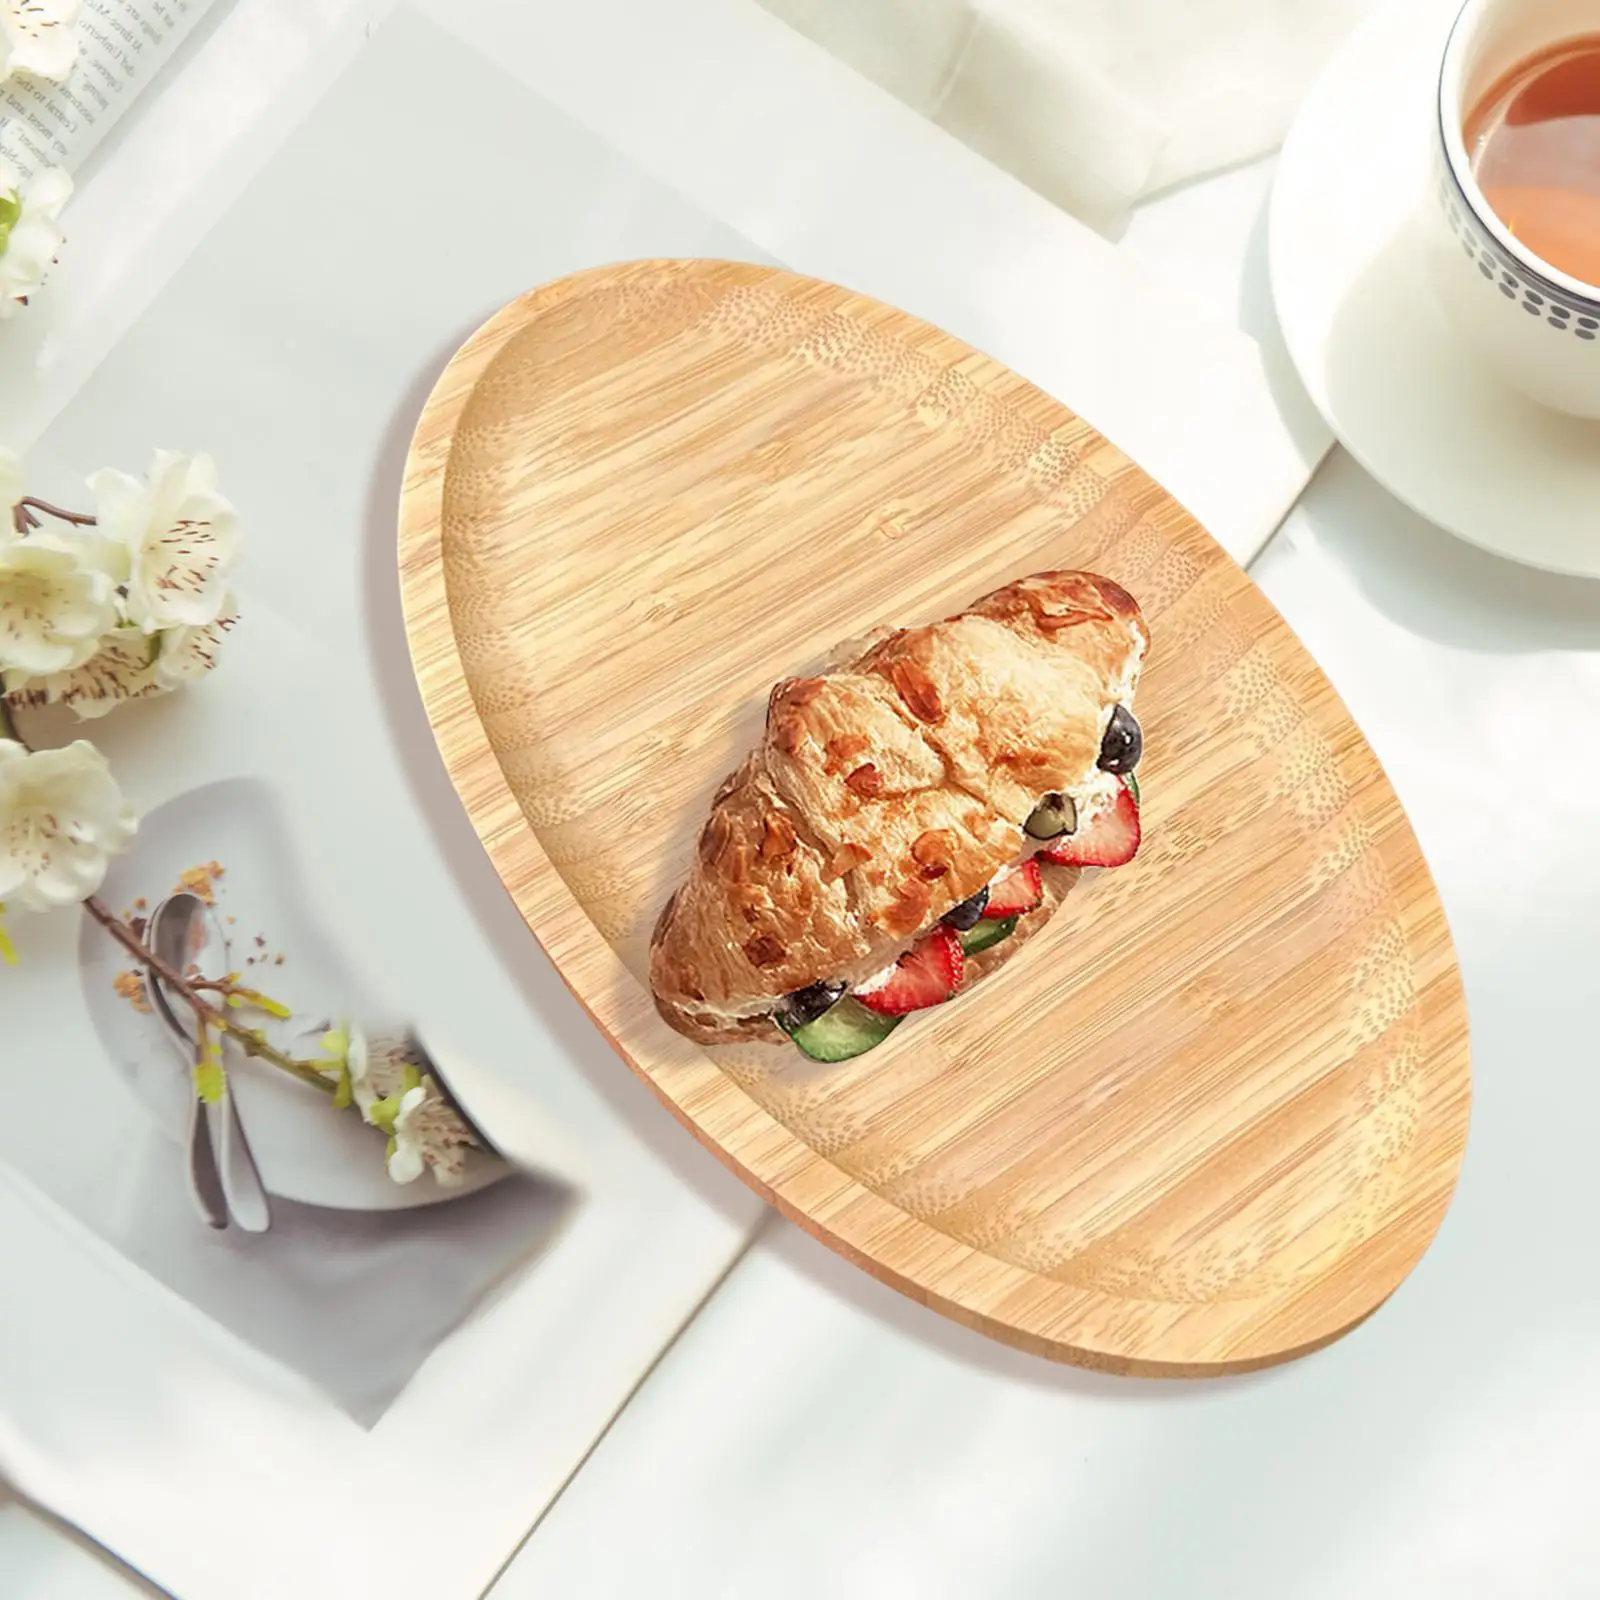 Wood Tray Photography Background Panel Wooden Trays Decorative Tray for Home Kitchen Decor Afternoon Tea Living Room Bathroom